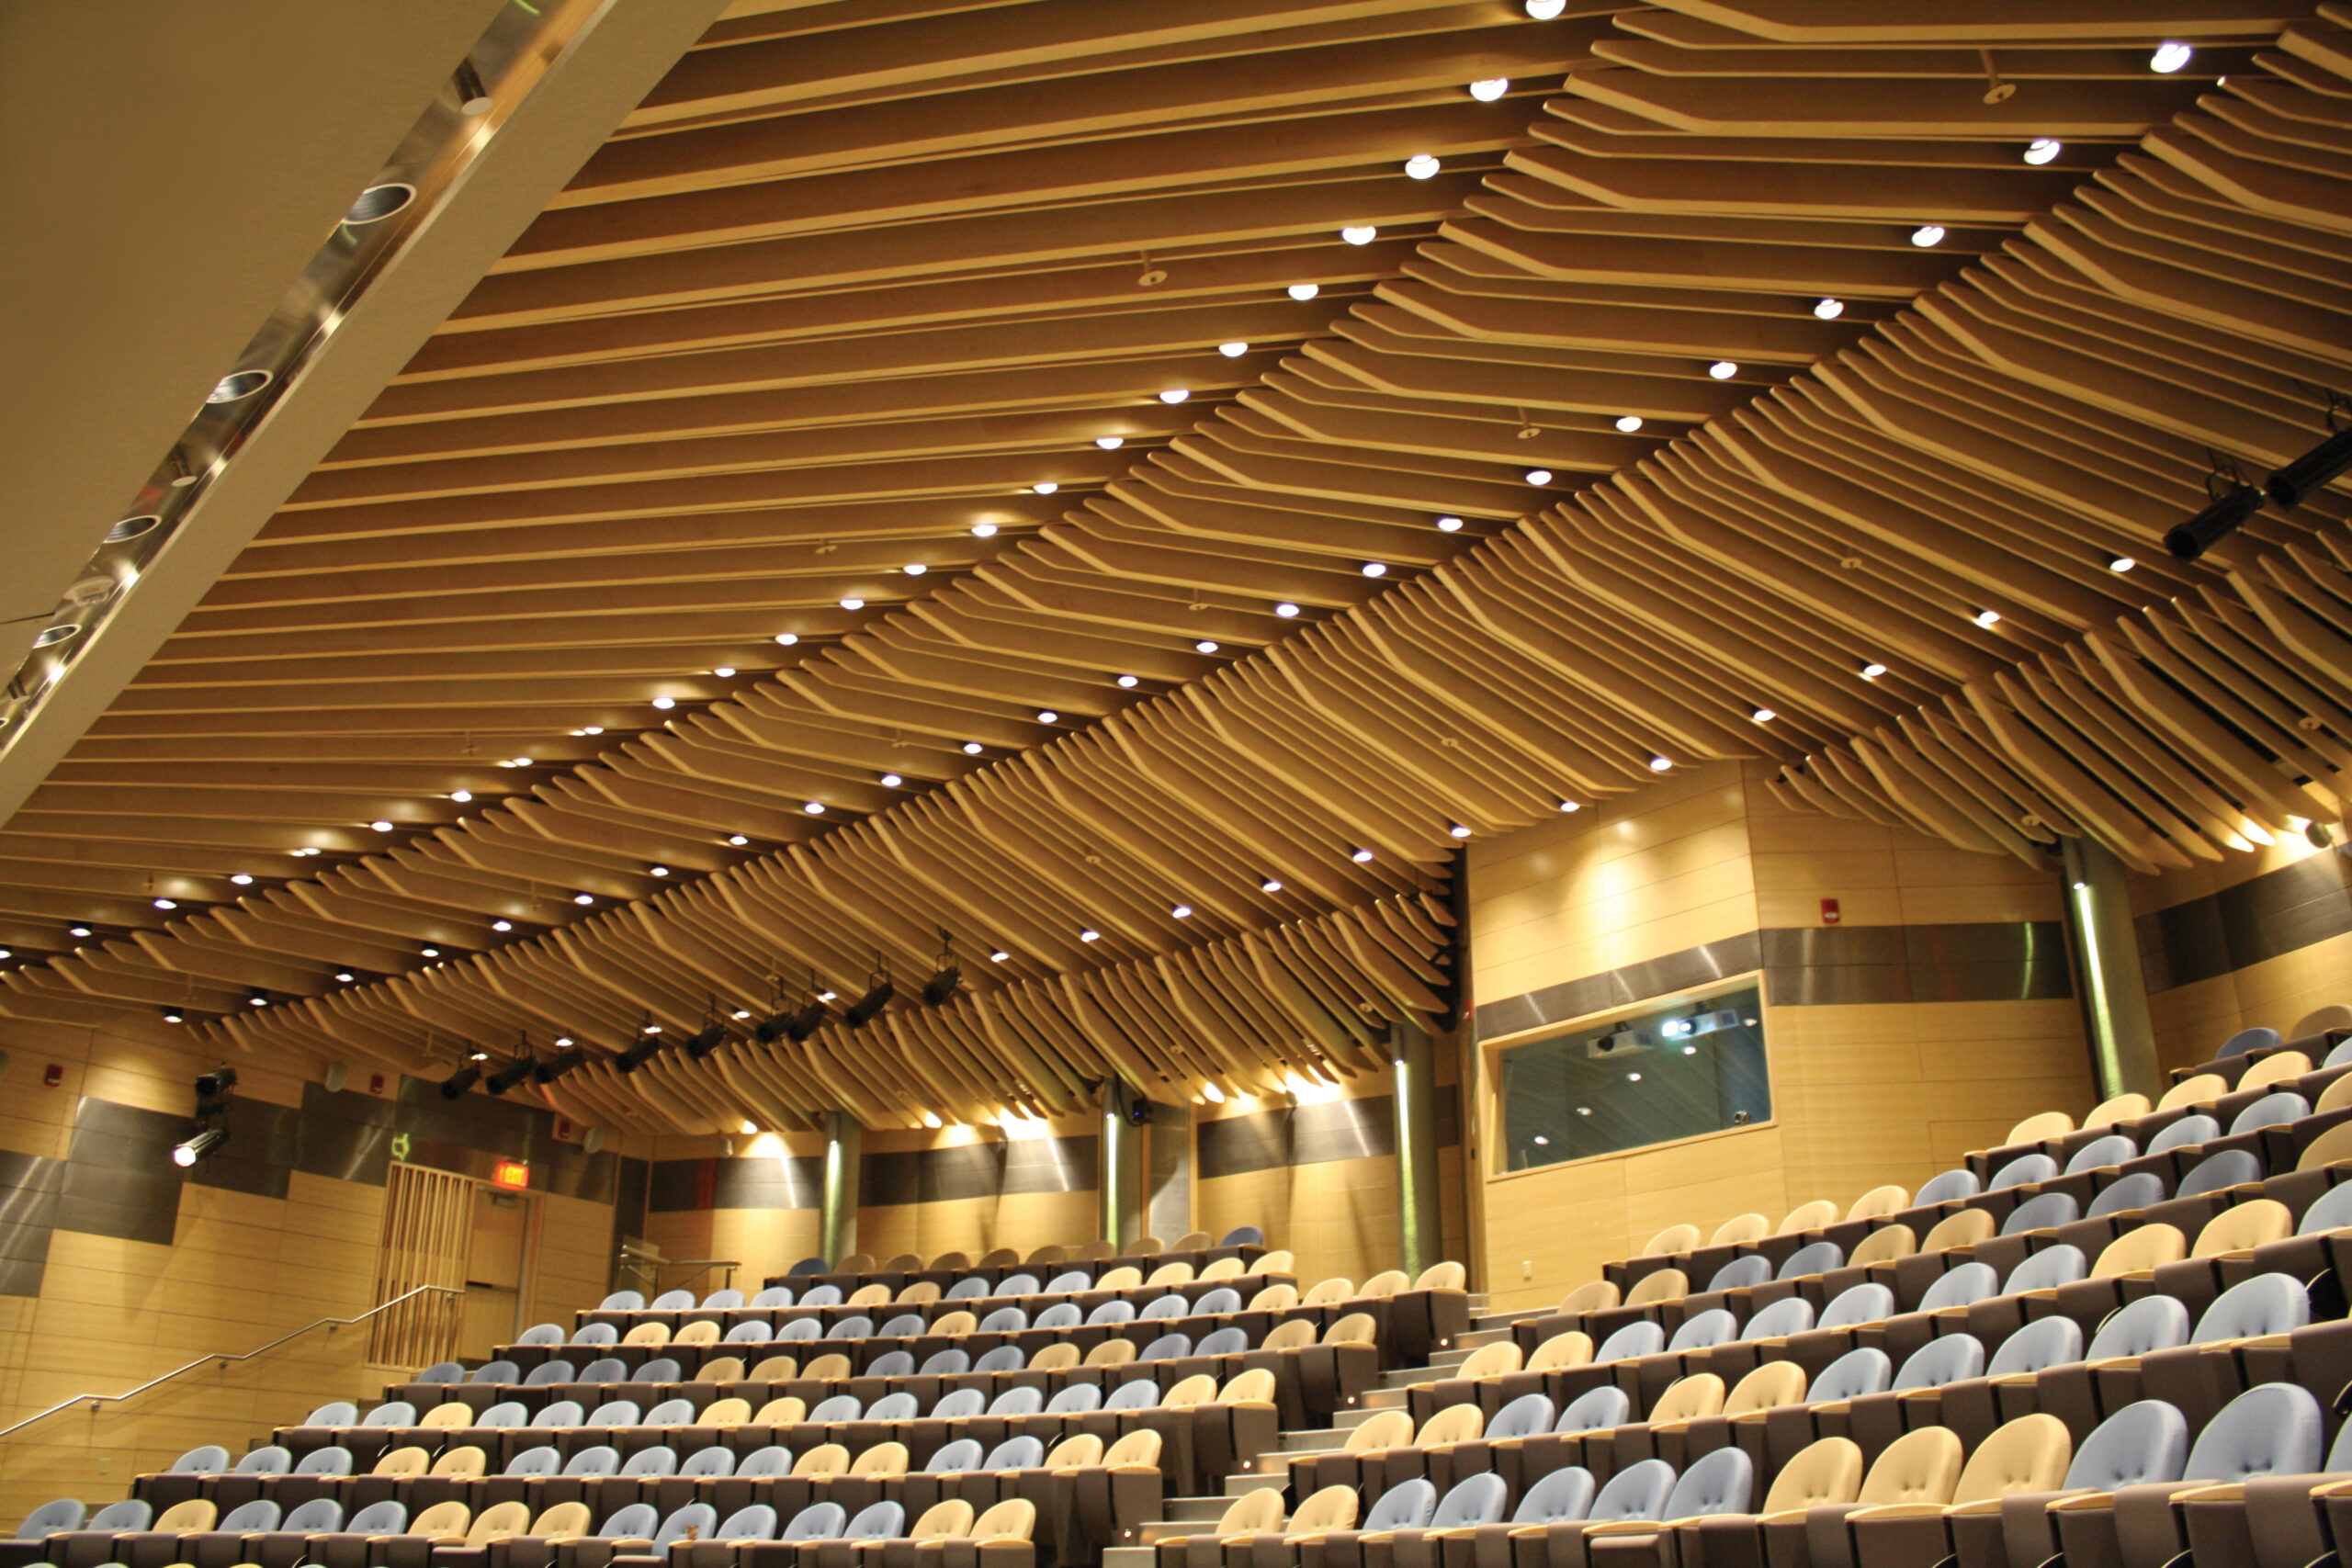 London Hospital Lecture Theatre Think Lightweight Royal Plywood Ceiling Baffles Ceiling Beams Ceiling Beams near me Ceiling Baffles near me Ceiling laminate beams